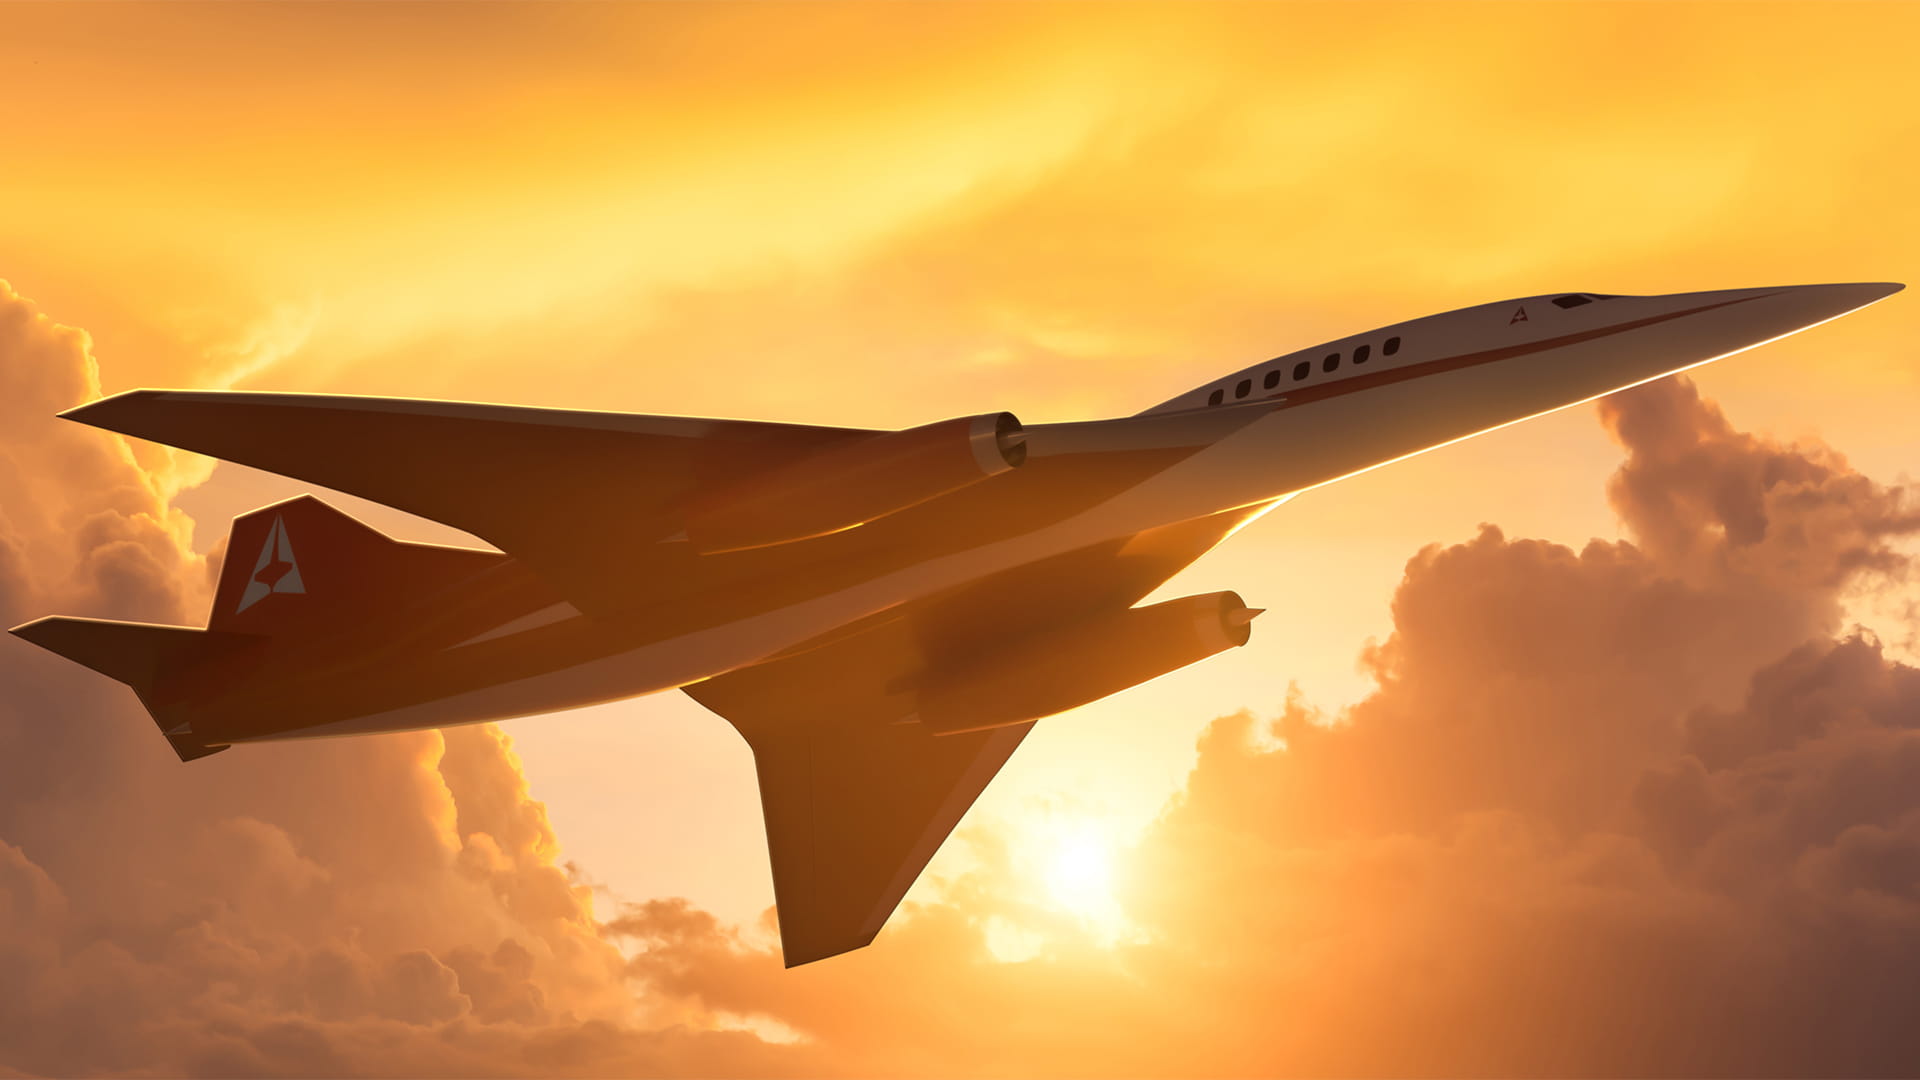 Collins Aerospace has been selected by Aerion Corporation, the leader in supersonic technology, for the development of multiple actuation systems for the AS2 supersonic business jet.